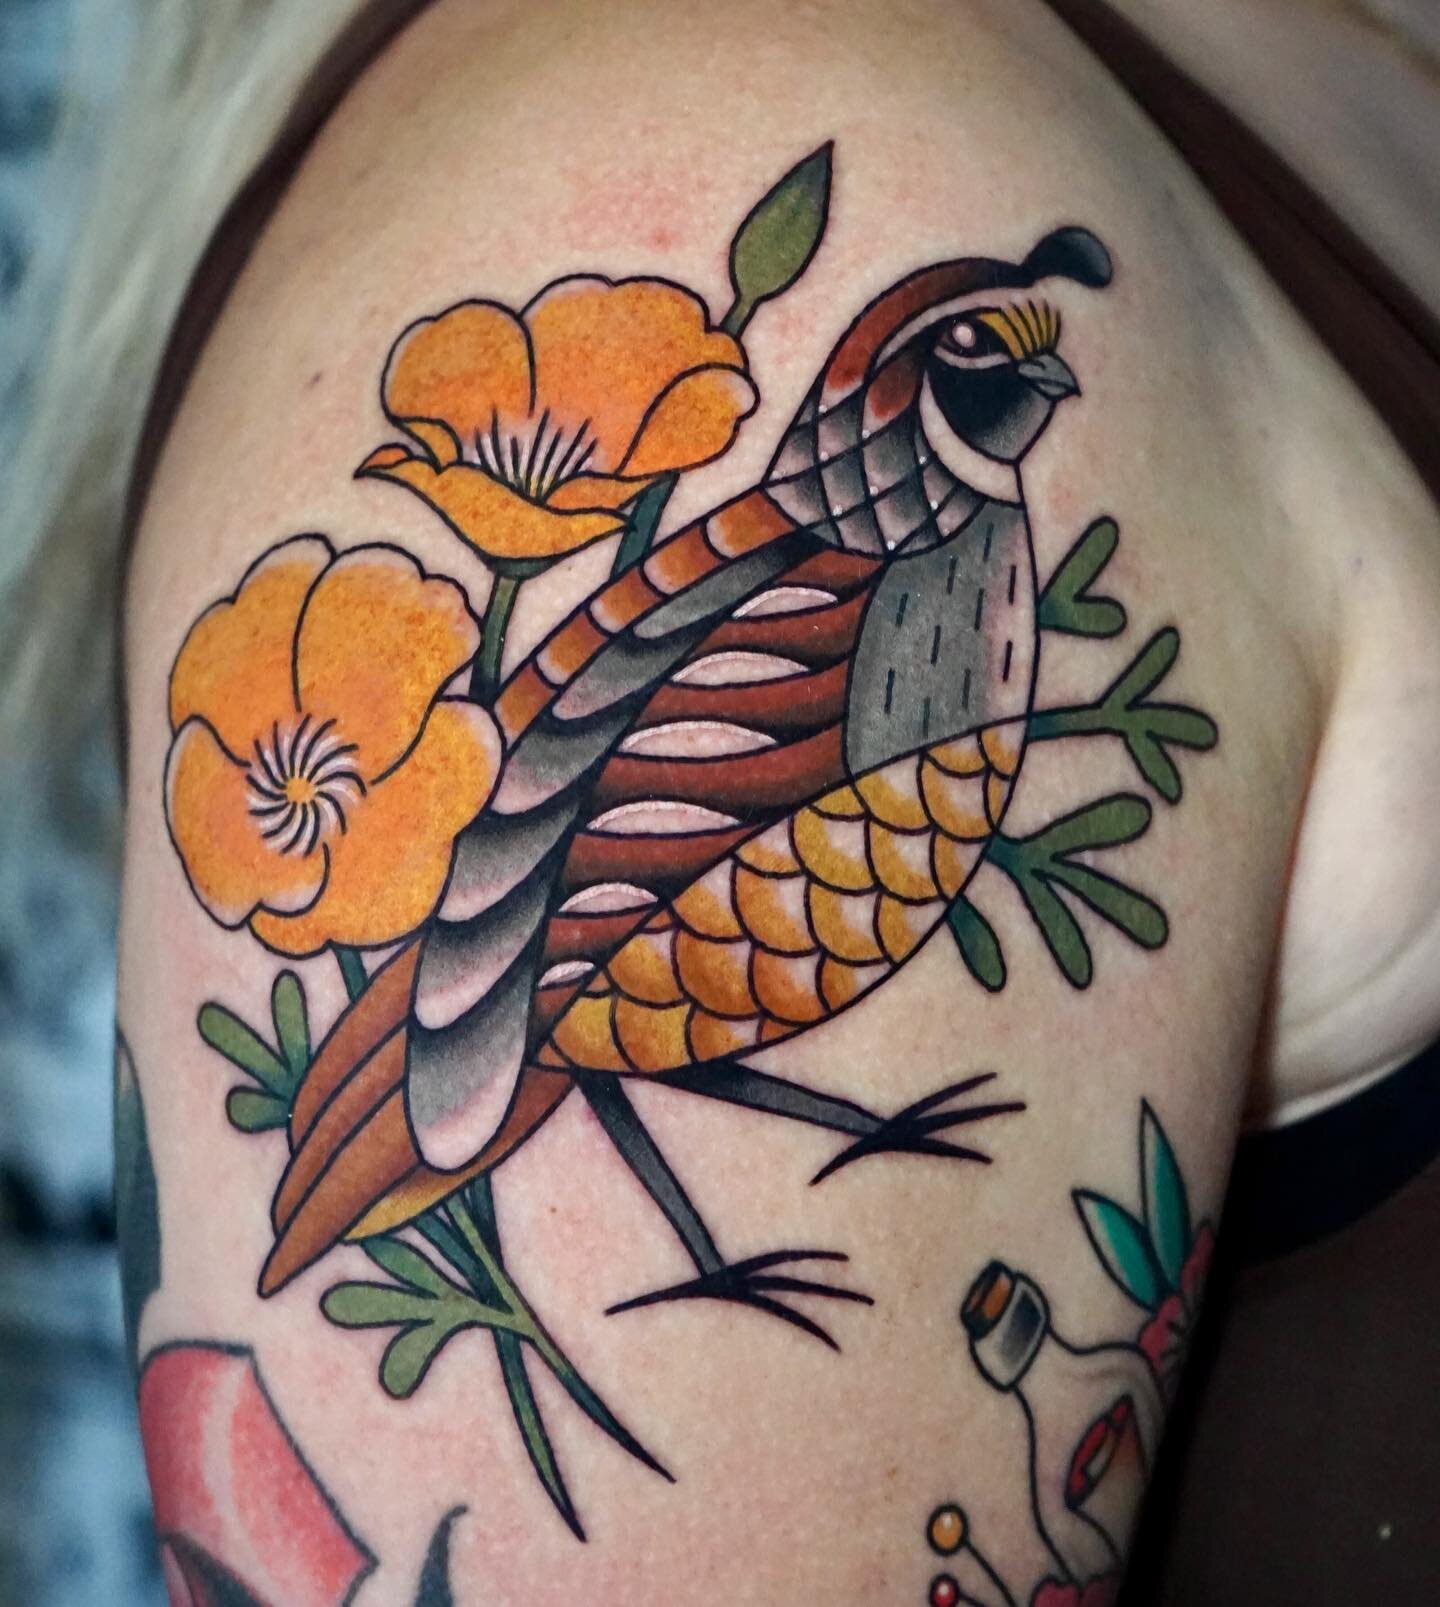 Tattoo uploaded by Tattoodo  Cute quail by Becca GennéBacon  beccagennebacon neotraditional color quail feathers wings bird  flowers leaves nature tattoooftheday  Tattoodo